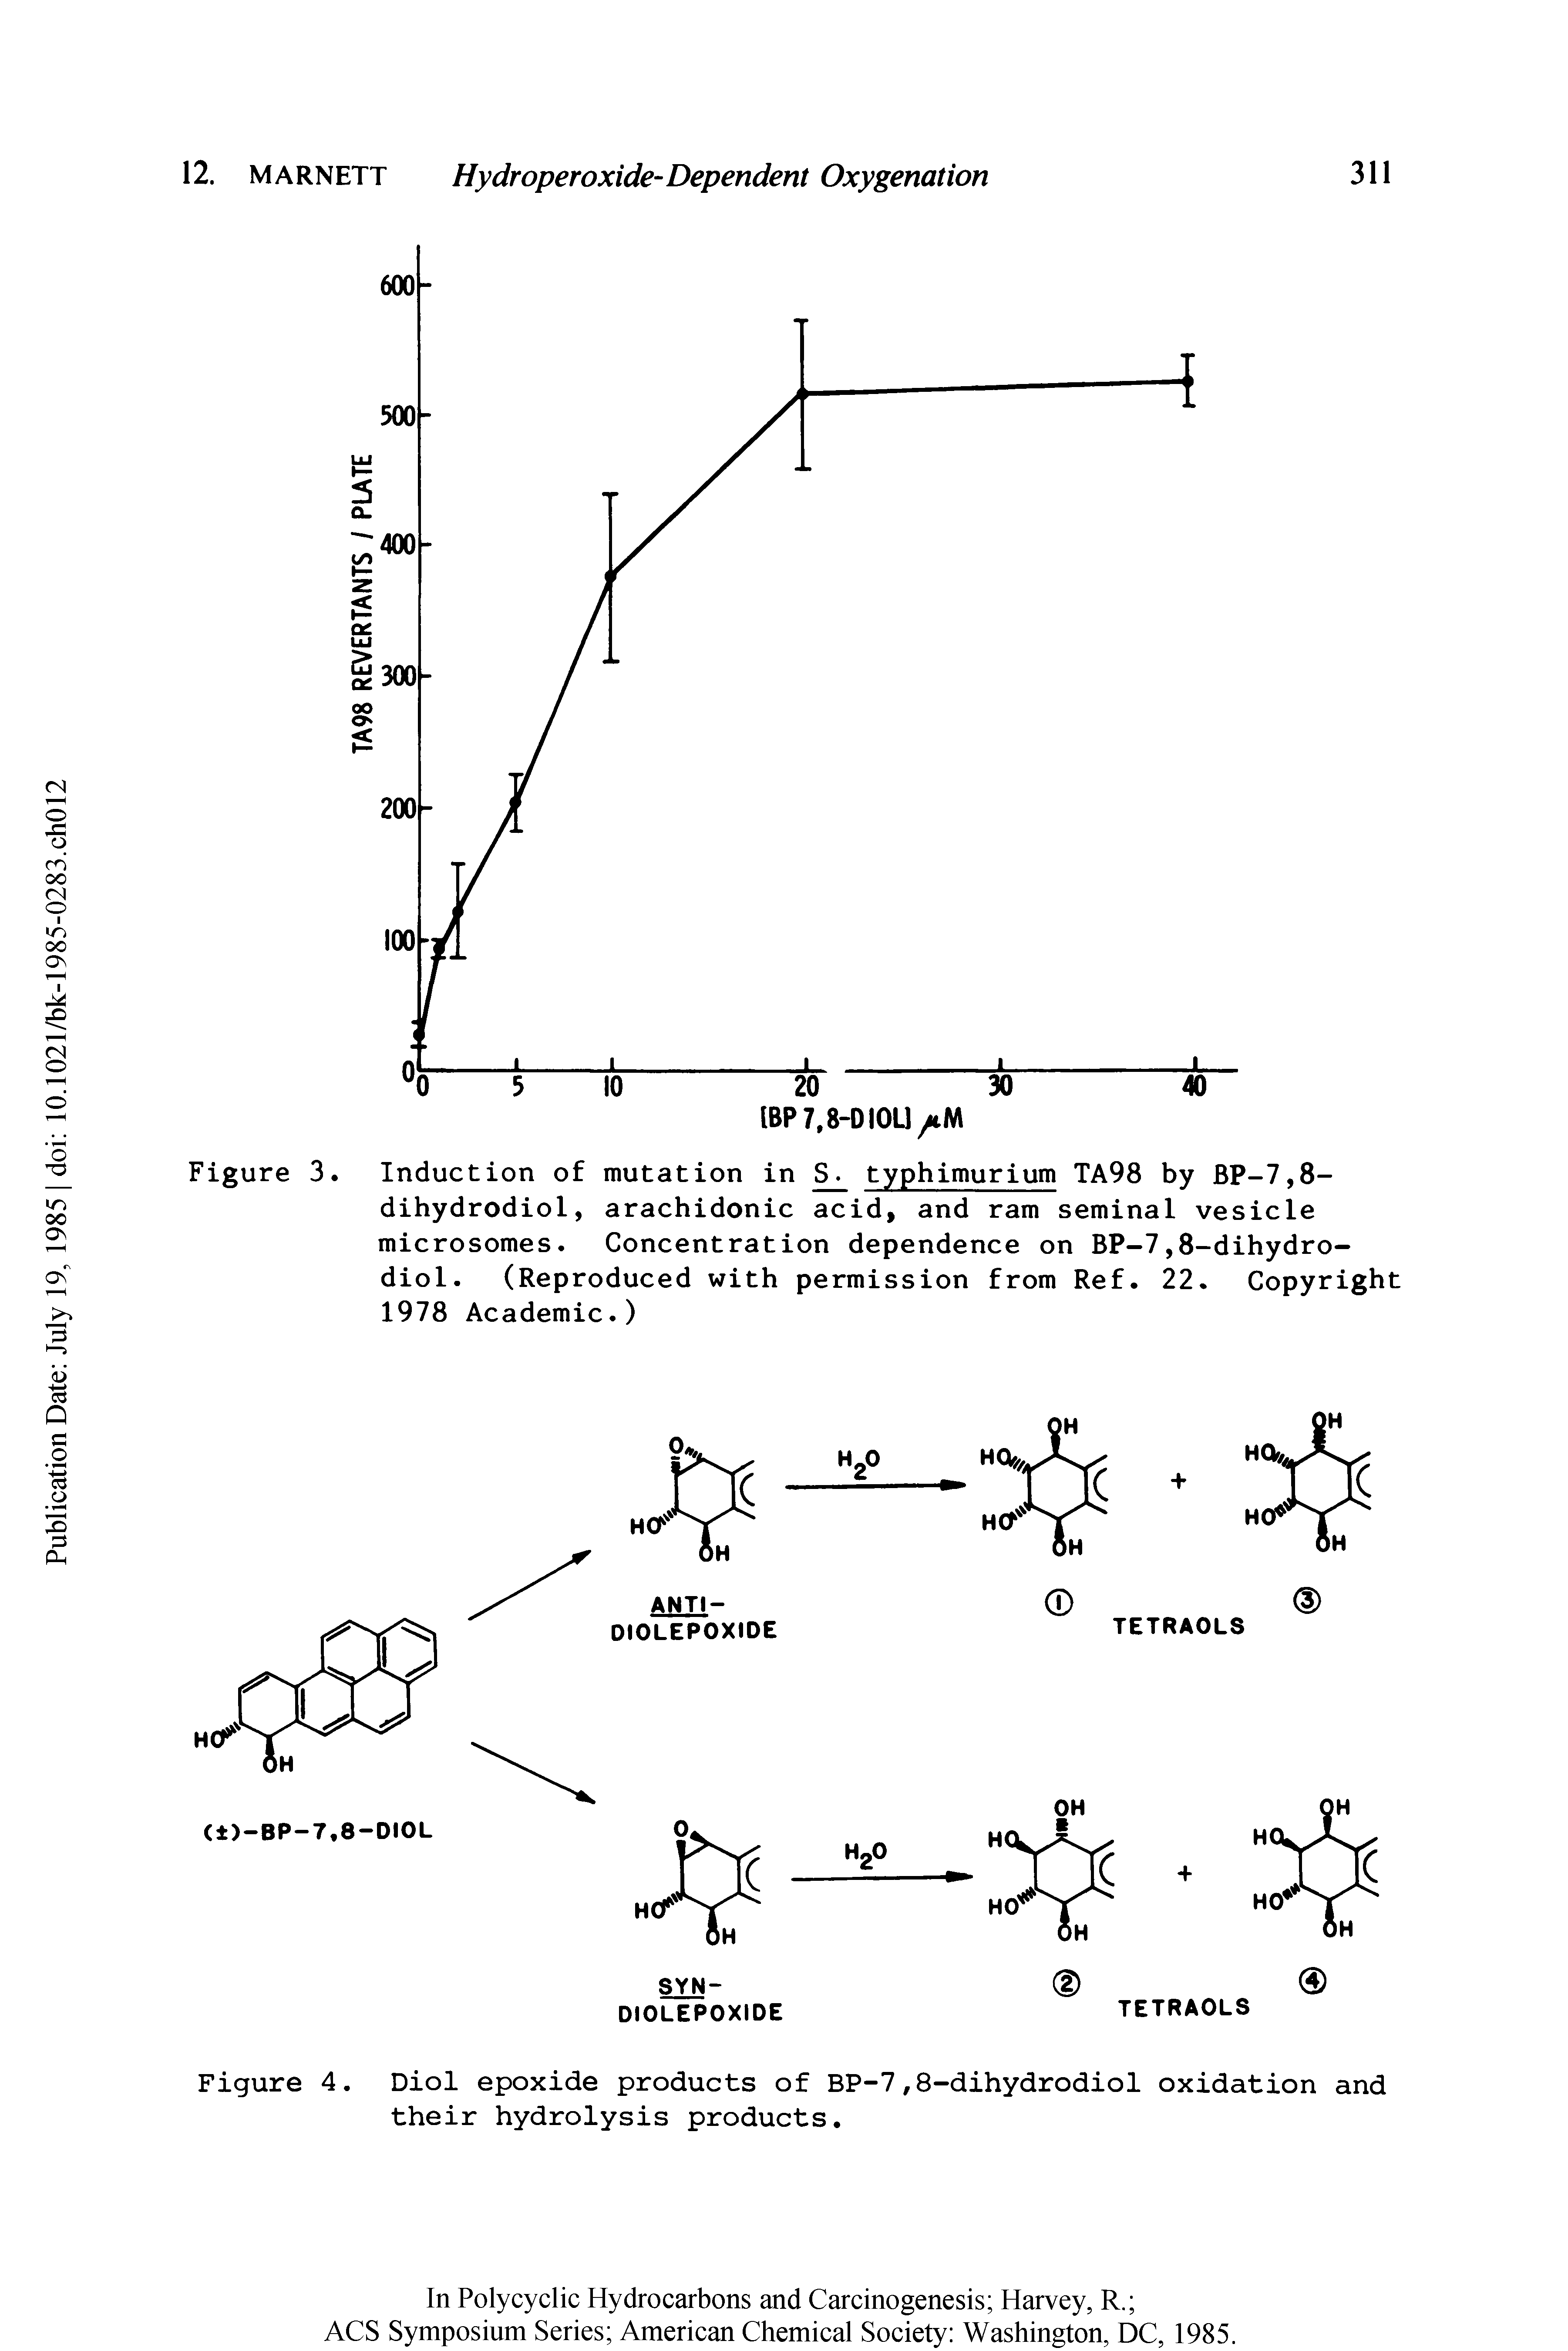 Figure 3. Induction of mutation in Sj typhimurium TA98 by BP-7,8-dihydrodiol, arachidonic acid, and ram seminal vesicle microsomes. Concentration dependence on BP-7,8-dihydro-diol. (Reproduced with permission from Ref. 22. Copyright 1978 Academic.)...